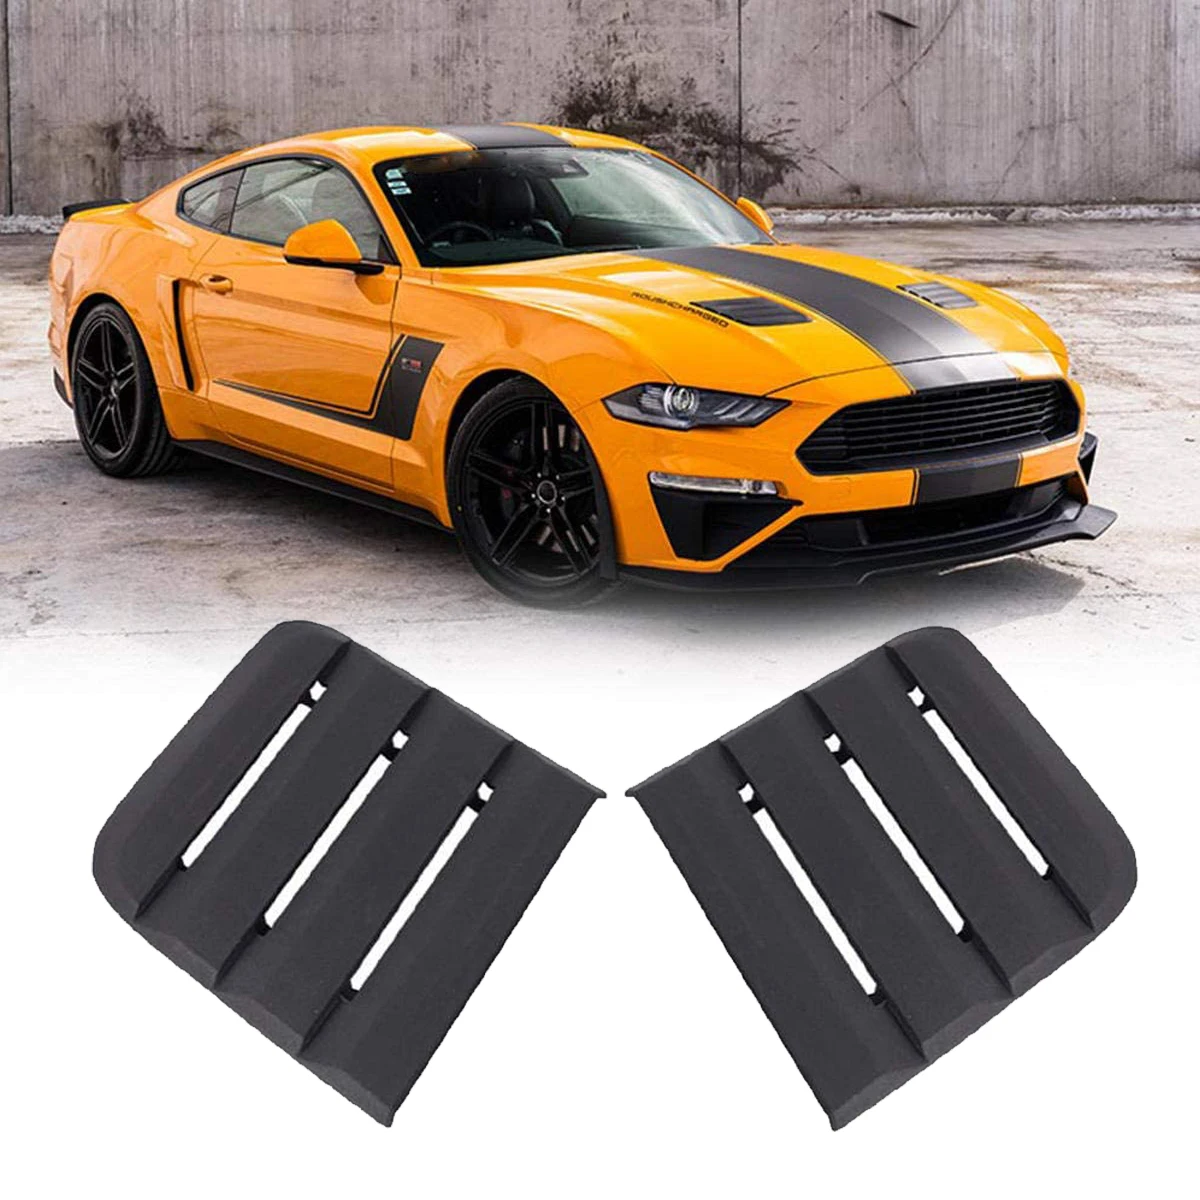 

Car Hood Bonnet Vent Engine Cover Air Intake Scoop Decoration For Ford Mustang GT Ecoboost 2018 2019